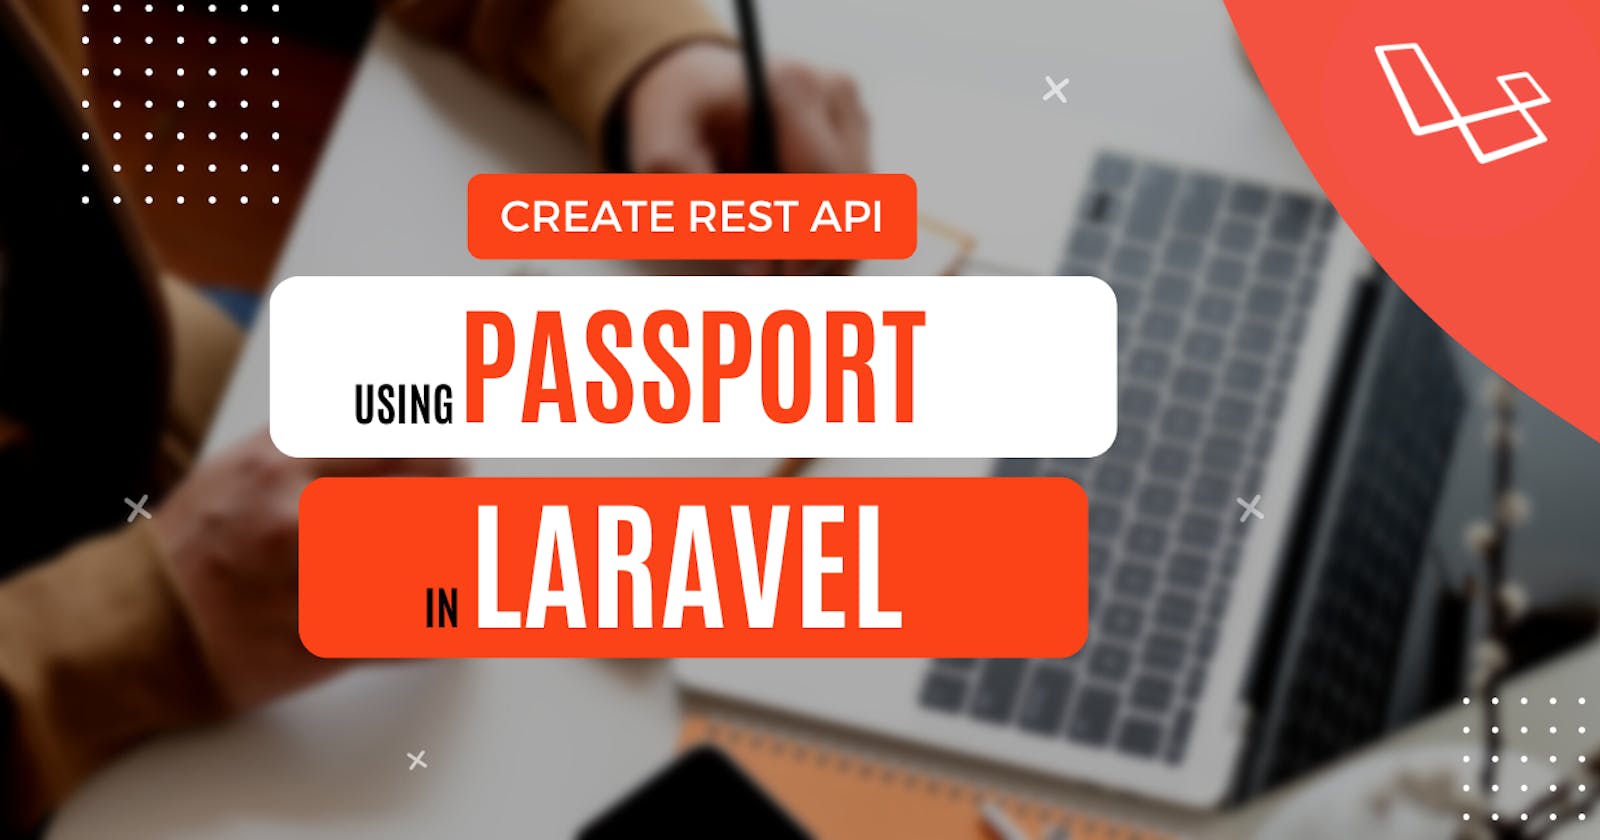 What is OAuth2? How to install Passport Package in Laravel?